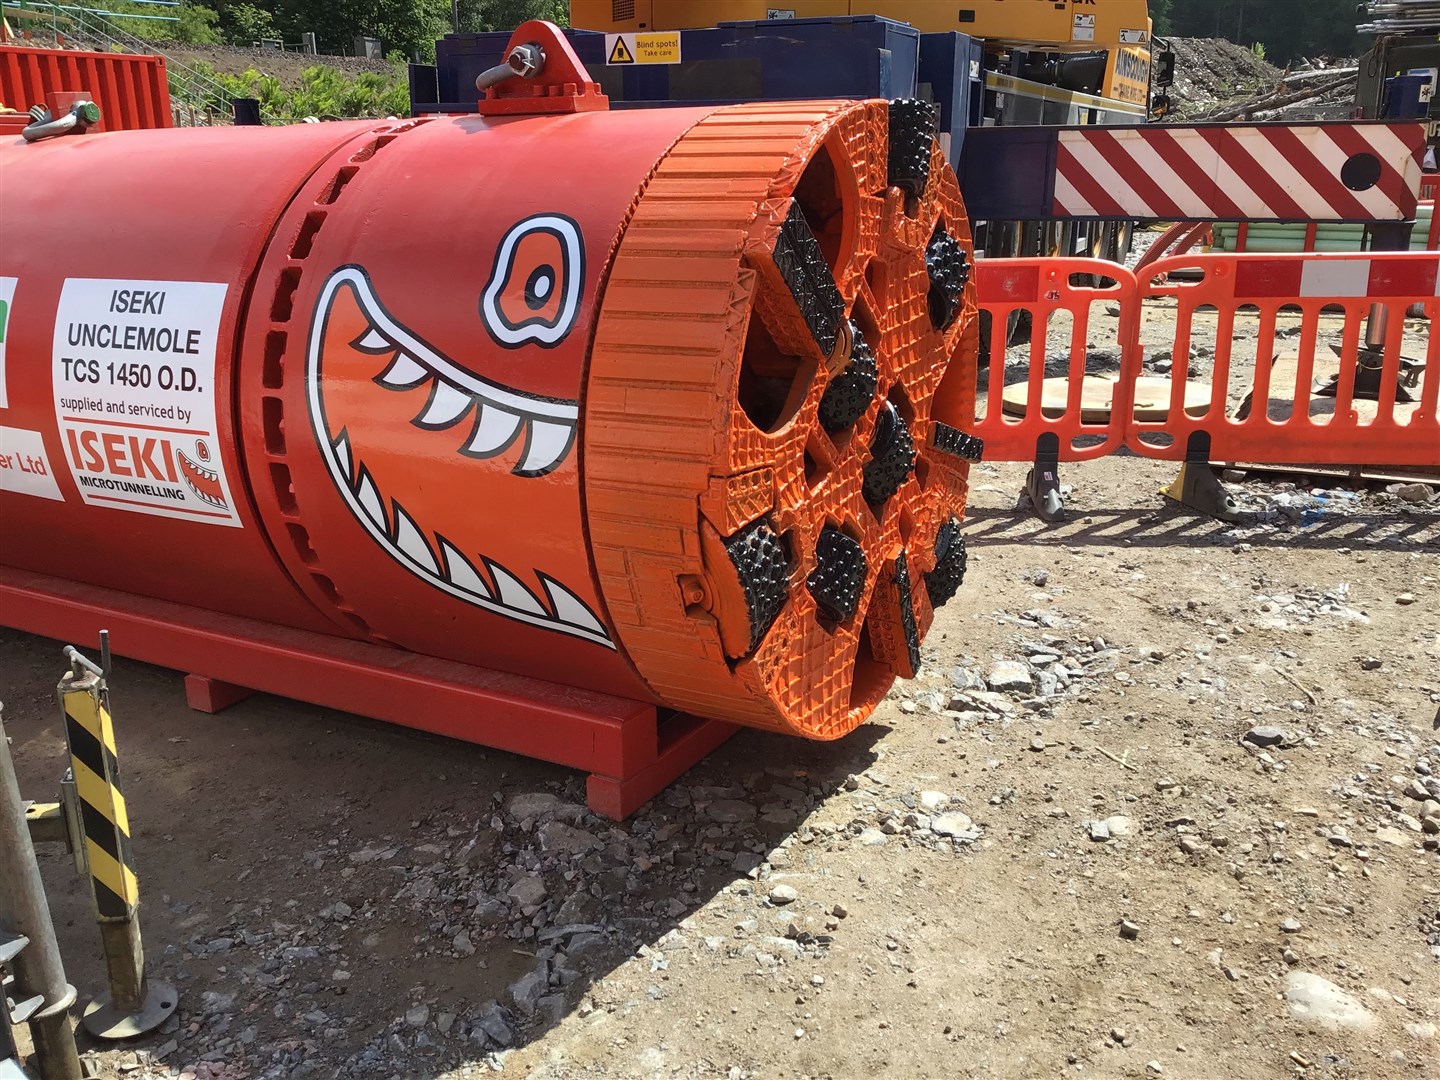 The Iseki Unclemole Super TCS1200 is powered by hydraulics which pushes the Tunnel Boring Machine deeper underground with slurry pipes treating the excavated material from the cutting face.